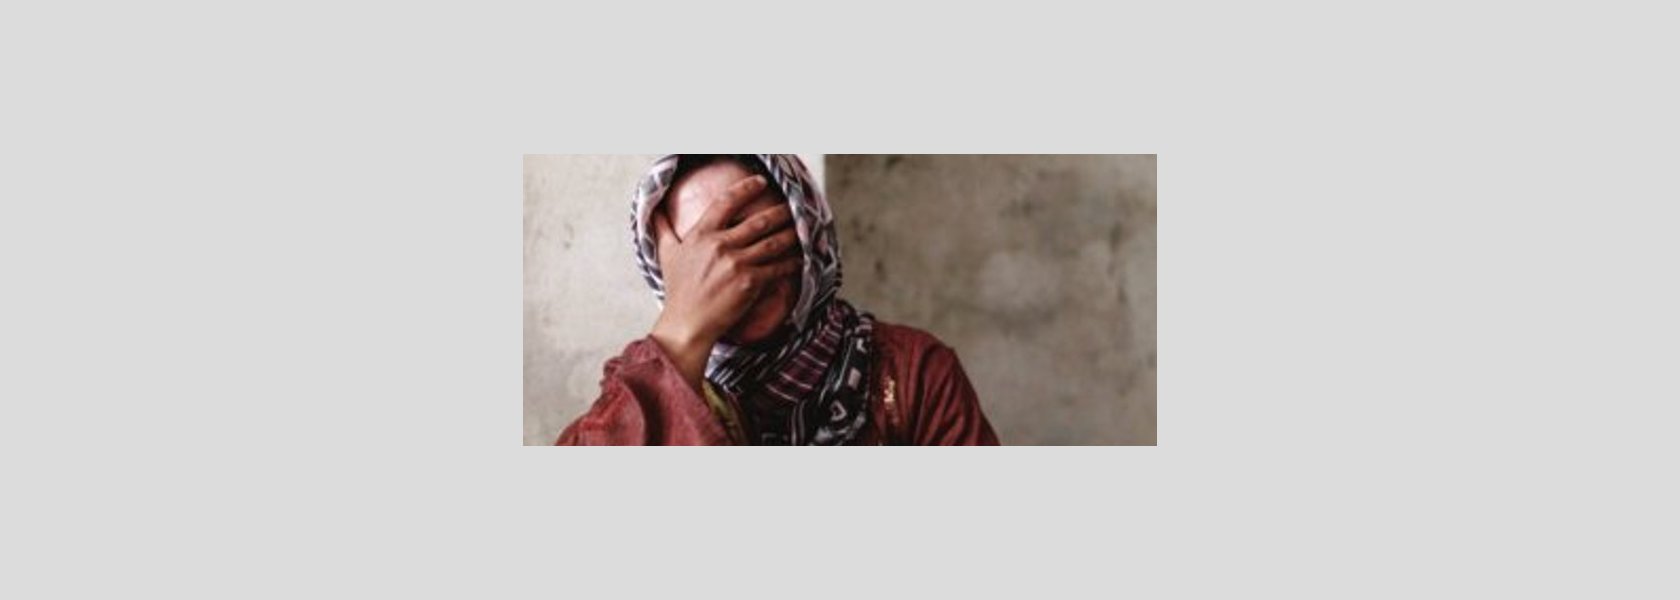 Violence Against Women In Syria Breaking The Silence